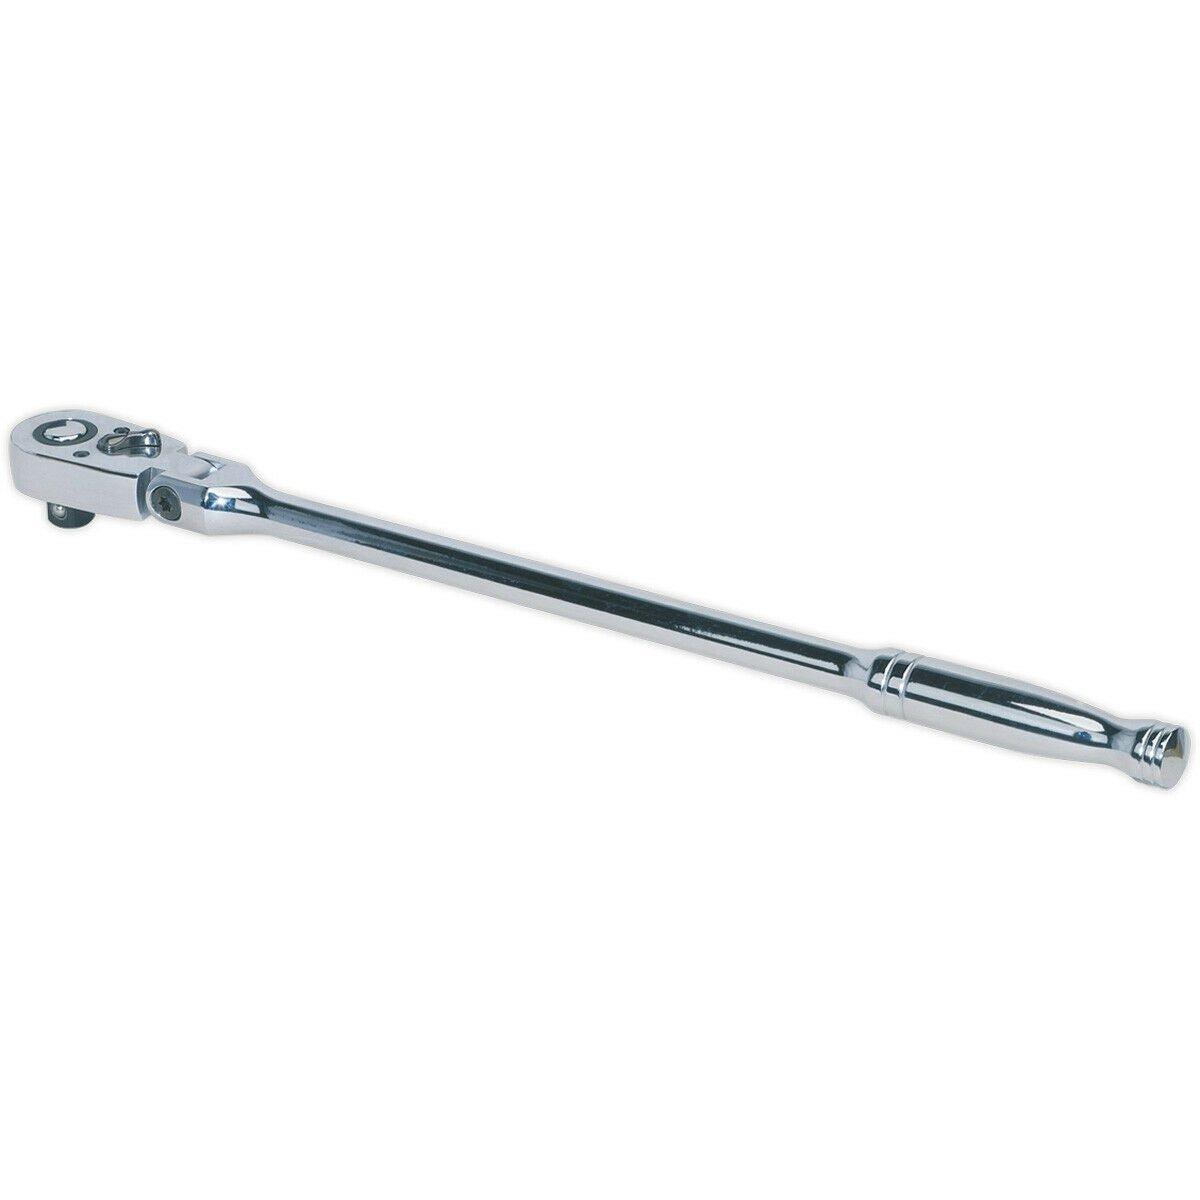 Extra Long 48-Tooth Flexi-Head Ratchet Wrench - 1/2 Inch Sq Drive - Flip Reverse